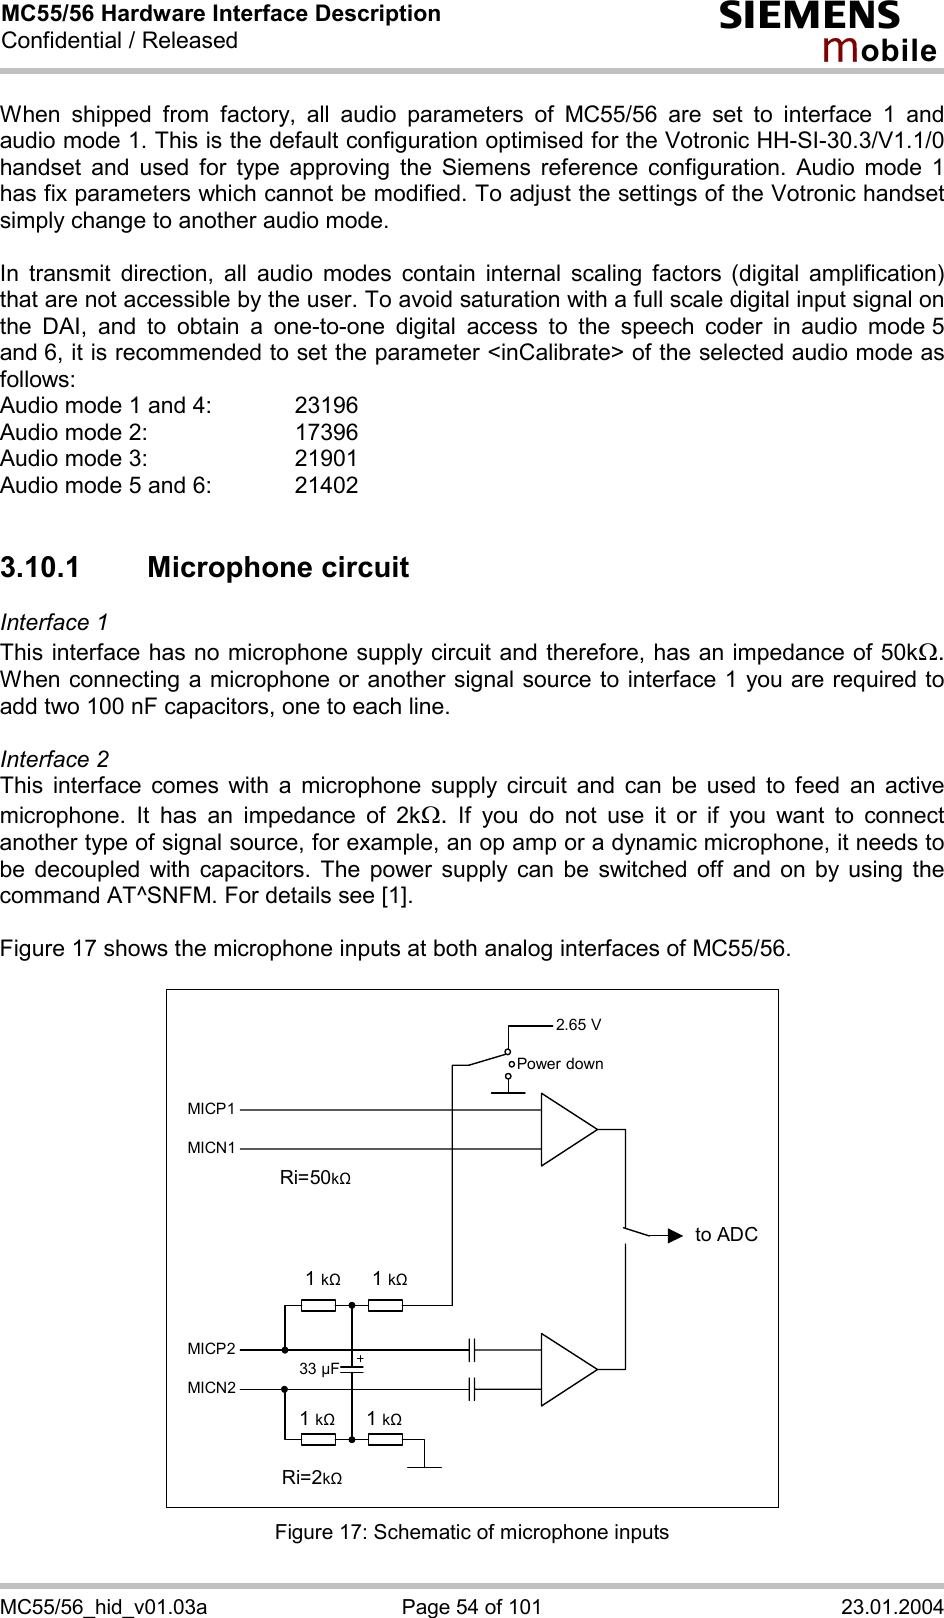 MC55/56 Hardware Interface Description Confidential / Released s mo b i l e MC55/56_hid_v01.03a  Page 54 of 101  23.01.2004 When shipped from factory, all audio parameters of MC55/56 are set to interface 1 and audio mode 1. This is the default configuration optimised for the Votronic HH-SI-30.3/V1.1/0 handset and used for type approving the Siemens reference configuration. Audio mode 1 has fix parameters which cannot be modified. To adjust the settings of the Votronic handset simply change to another audio mode.  In transmit direction, all audio modes contain internal scaling factors (digital amplification) that are not accessible by the user. To avoid saturation with a full scale digital input signal on the DAI, and to obtain a one-to-one digital access to the speech coder in audio mode 5 and 6, it is recommended to set the parameter &lt;inCalibrate&gt; of the selected audio mode as follows: Audio mode 1 and 4:    23196 Audio mode 2:     17396 Audio mode 3:    21901 Audio mode 5 and 6:    21402  3.10.1 Microphone circuit Interface 1  This interface has no microphone supply circuit and therefore, has an impedance of 50kW. When connecting a microphone or another signal source to interface 1 you are required to add two 100 nF capacitors, one to each line.   Interface 2 This interface comes with a microphone supply circuit and can be used to feed an active microphone. It has an impedance of 2kW. If you do not use it or if you want to connect another type of signal source, for example, an op amp or a dynamic microphone, it needs to be decoupled with capacitors. The power supply can be switched off and on by using the command AT^SNFM. For details see [1].  Figure 17 shows the microphone inputs at both analog interfaces of MC55/56.    2.65 V to ADC Power downMICP1MICN1 MICP2MICN2 1 k&quot;   1 k&quot;1 k&quot; 1 k&quot;33 µF Ri=50k&quot; Ri=2k&quot;  Figure 17: Schematic of microphone inputs 